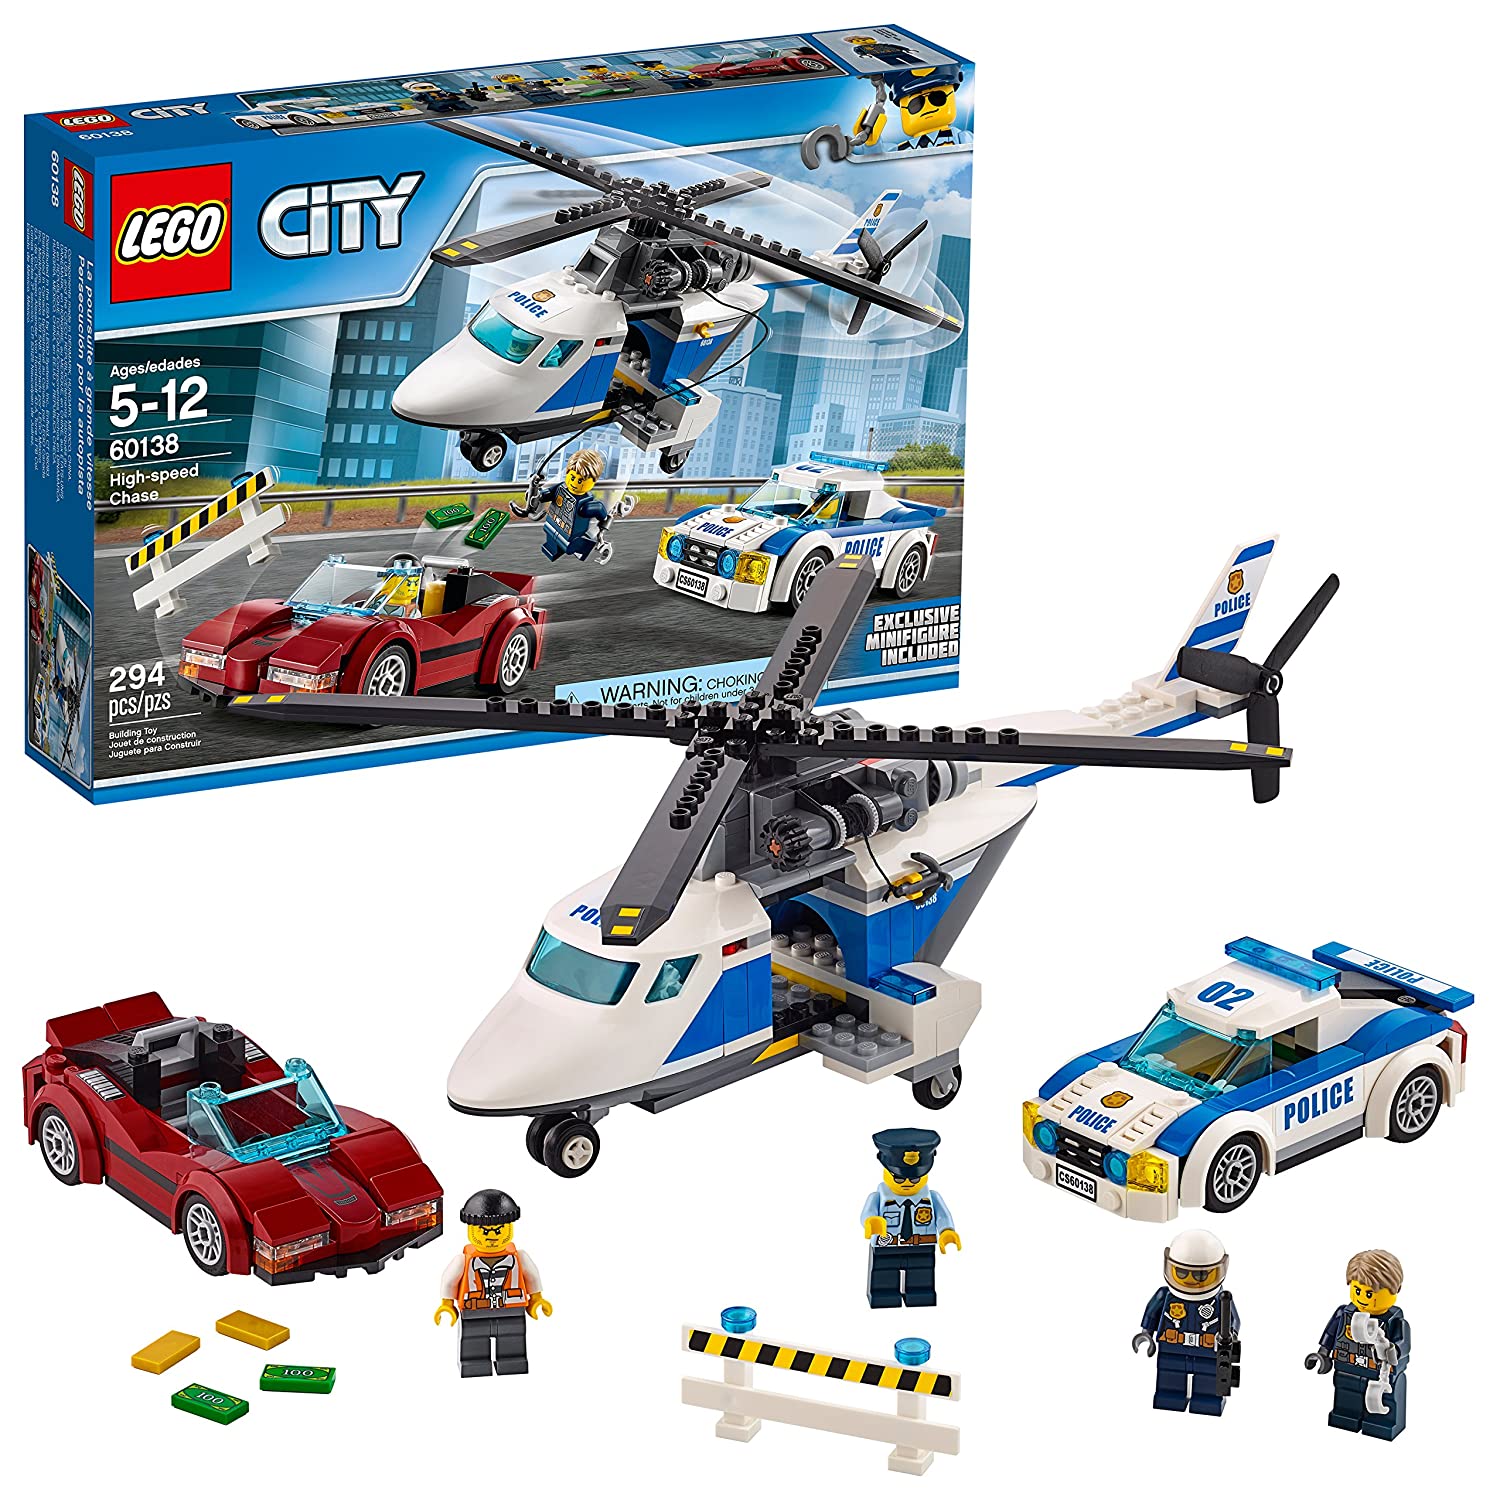 Top 9 Best LEGO Helicopter Sets Reviews in 2022 8